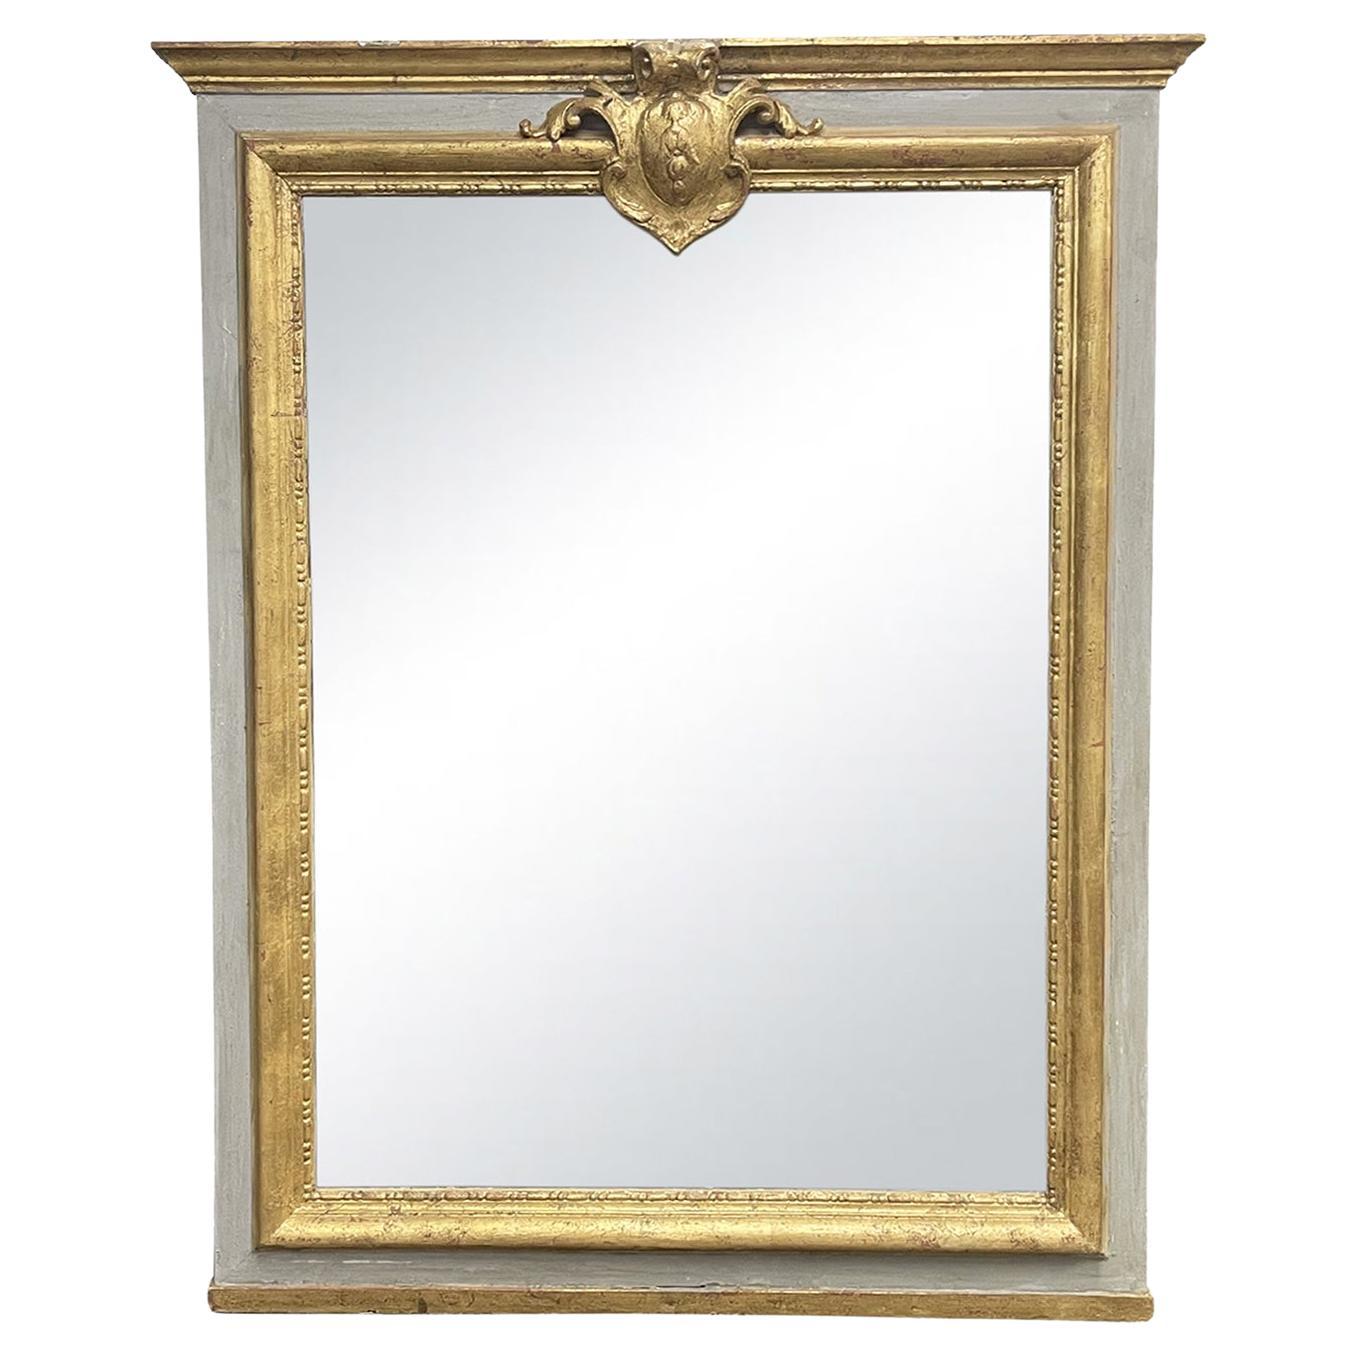 19th Century French Neo-Classical Gilded Pinewood Trumeau Mirror - Antique Décor For Sale